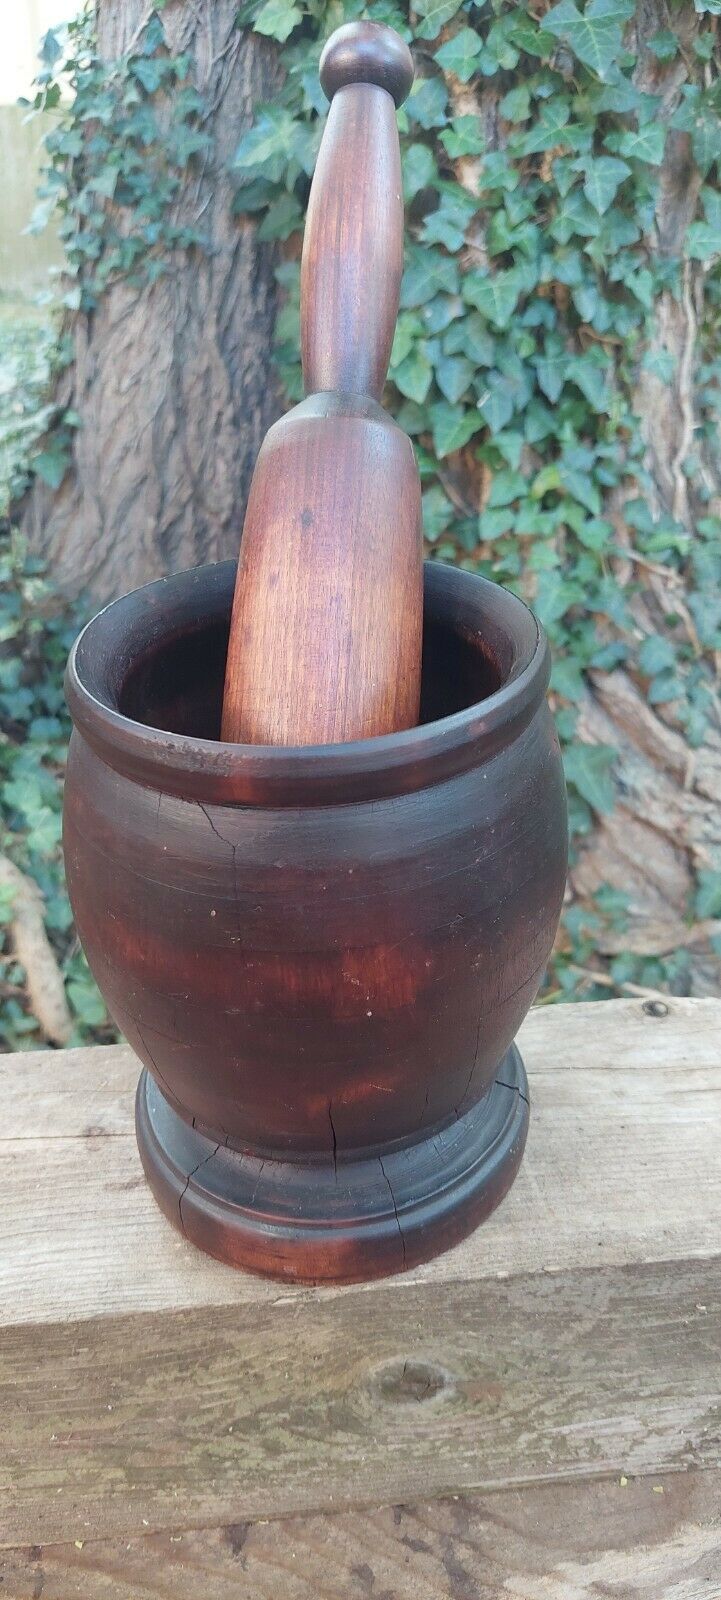 Antique Turned Wood Mortar & Pestle Treen Primitive Apothecary Spices